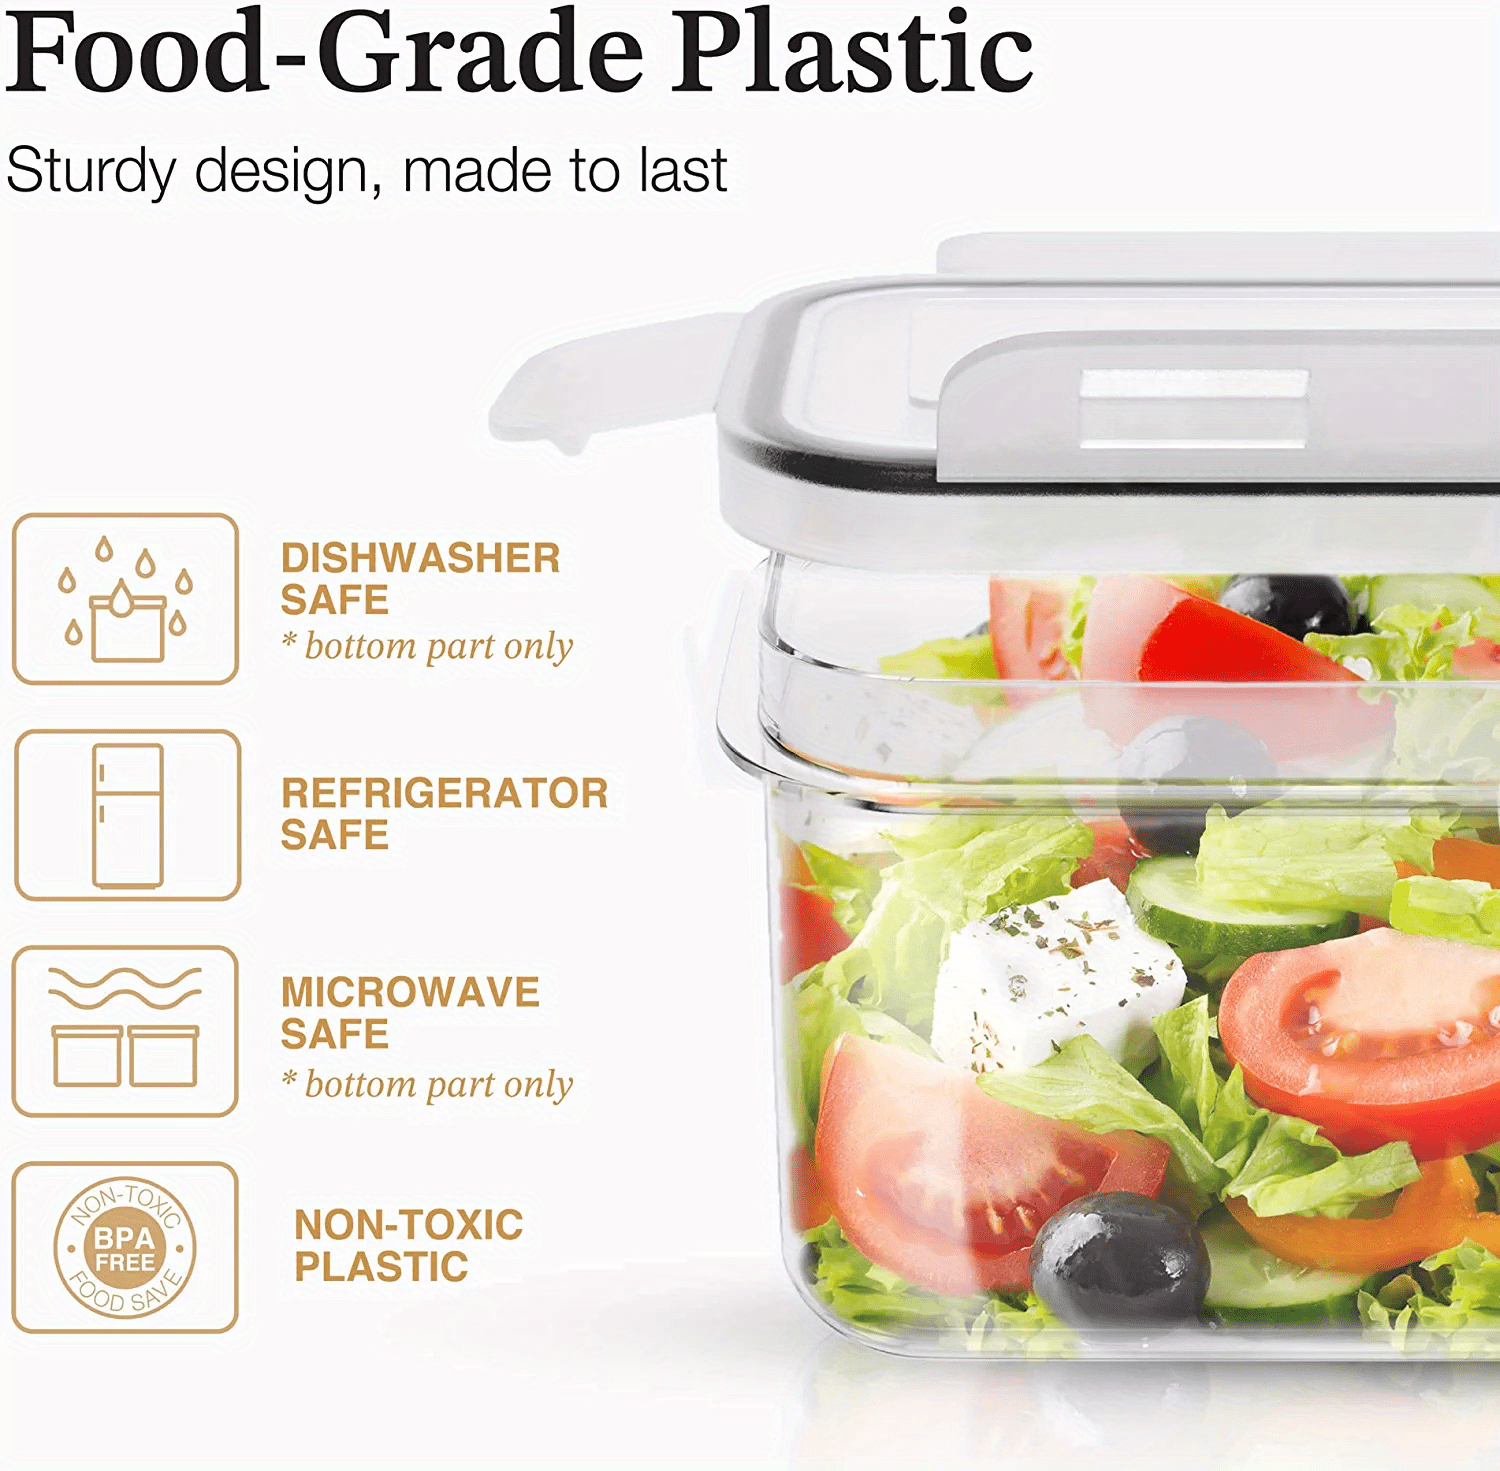 11 Safest Food Storage Containers For Non-Toxic Noms